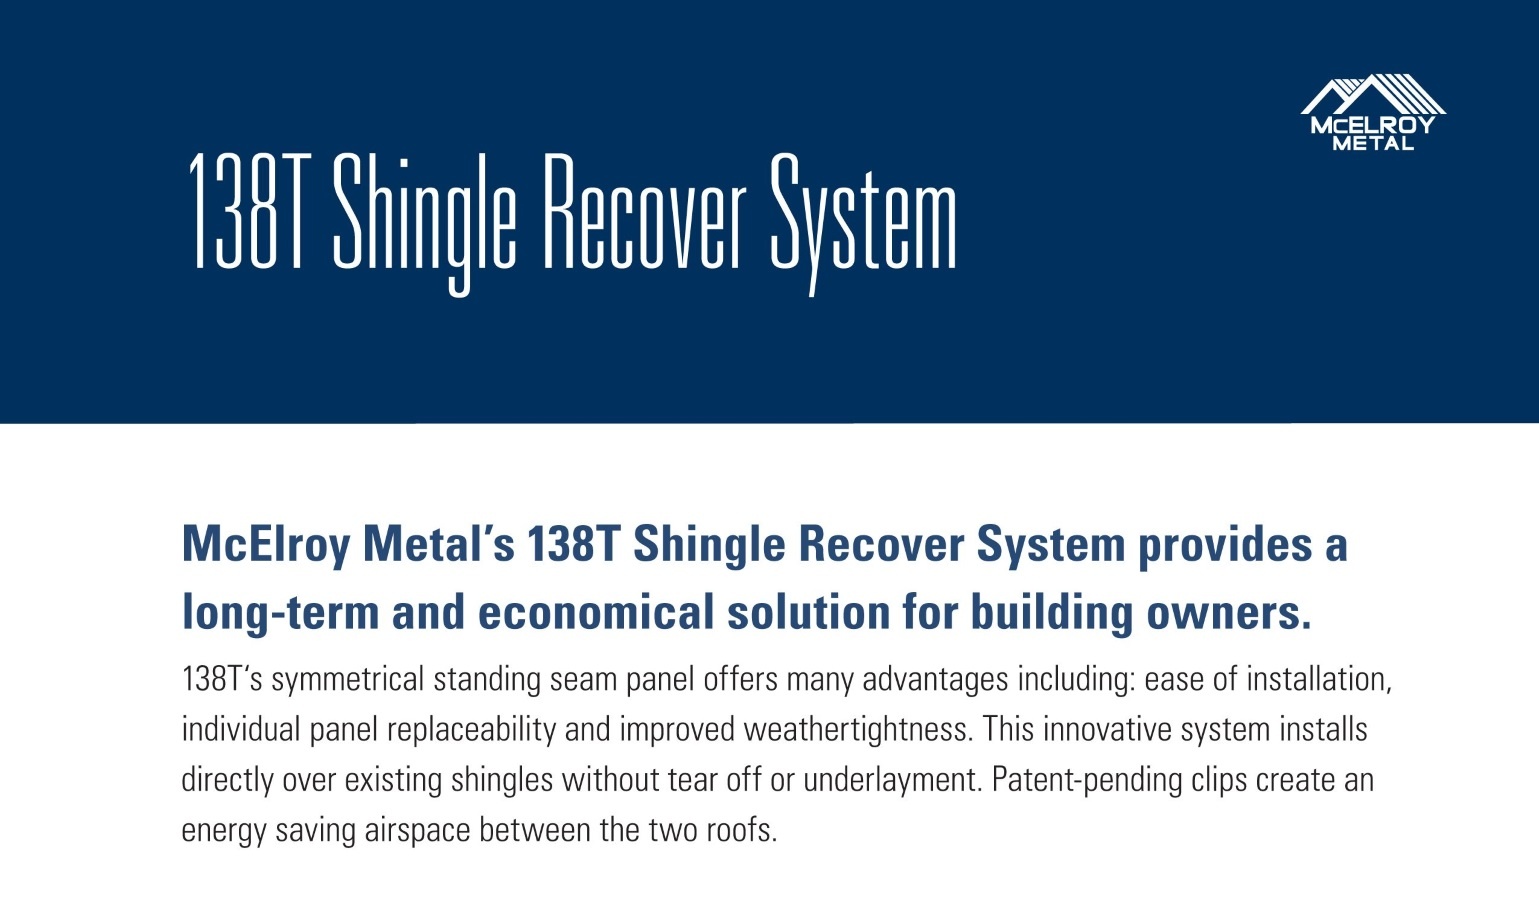 McElroy Metal makes 138T Shingle Recover brochure available for download